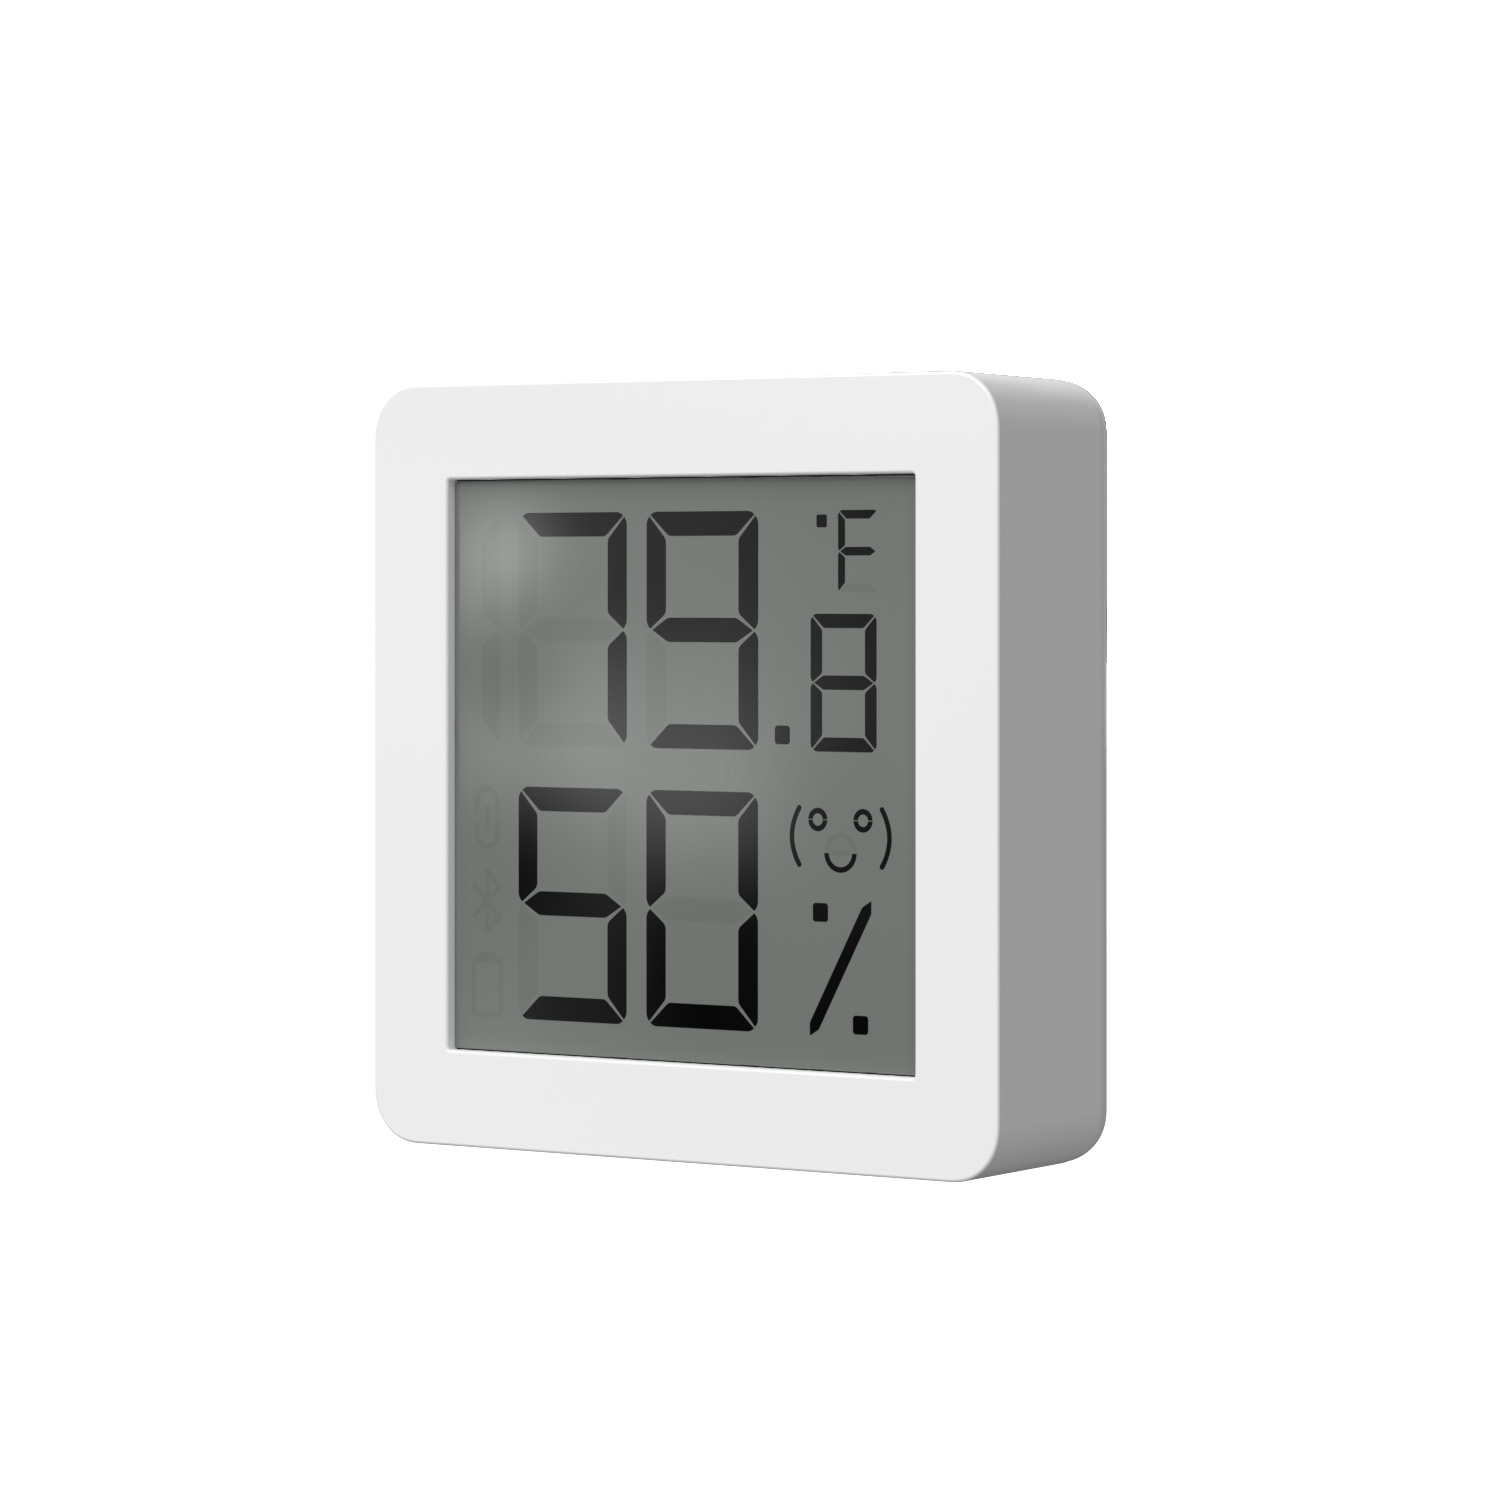 Meawow Digital Mini Hygrometer Indoor Thermometer with Temperature and Humidity 